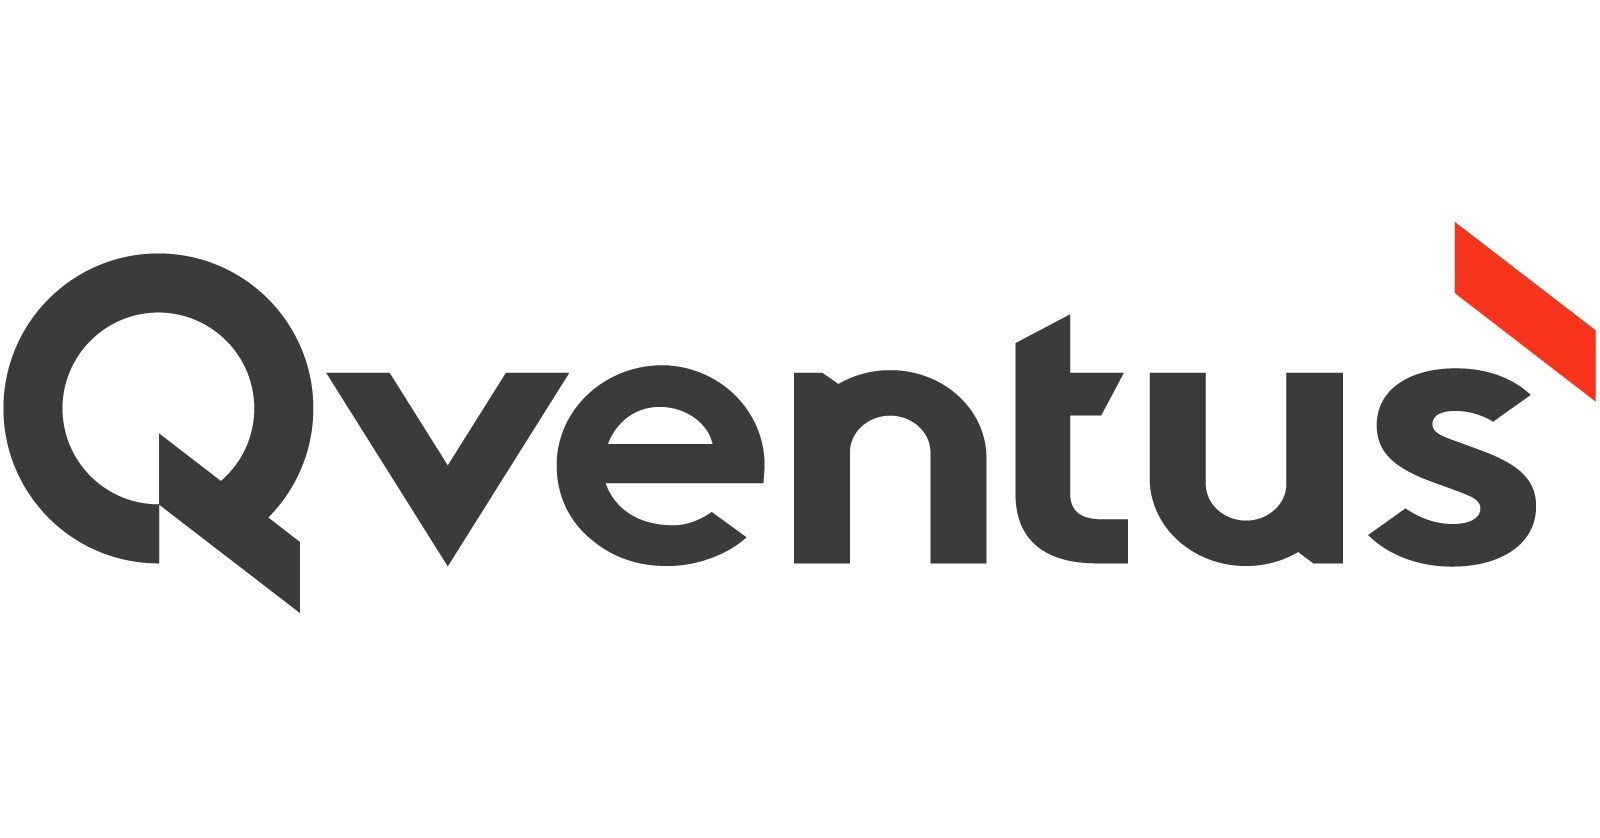 Qventus Recognized in 2022 Gartner® Hype Cycle™ Report for Real-Time Health System Technologies